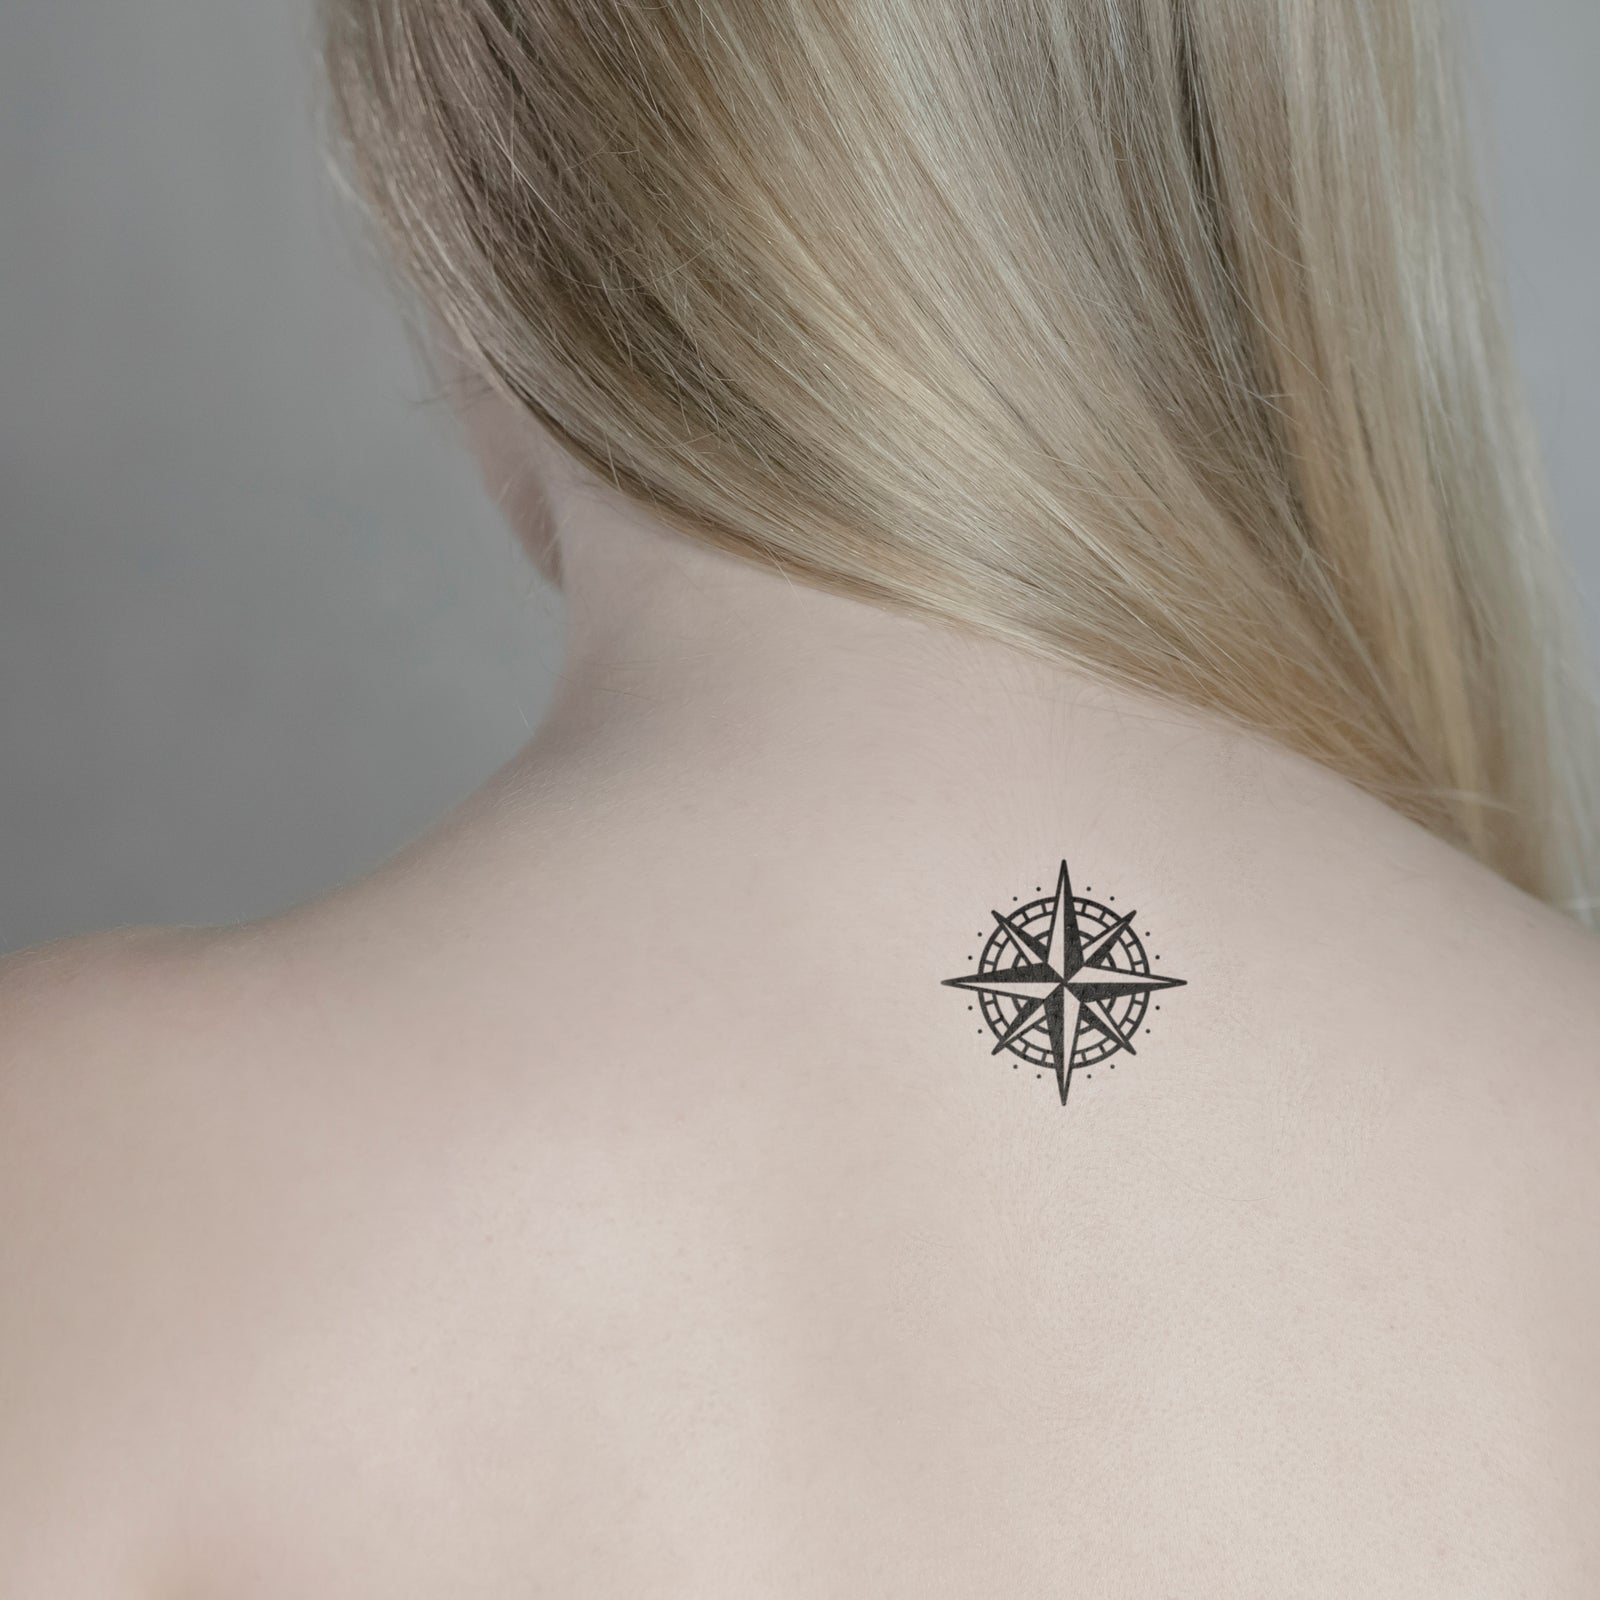 Abstract Compass Tattoo at Rs 600/square inch in Bengaluru | ID: 23891950230